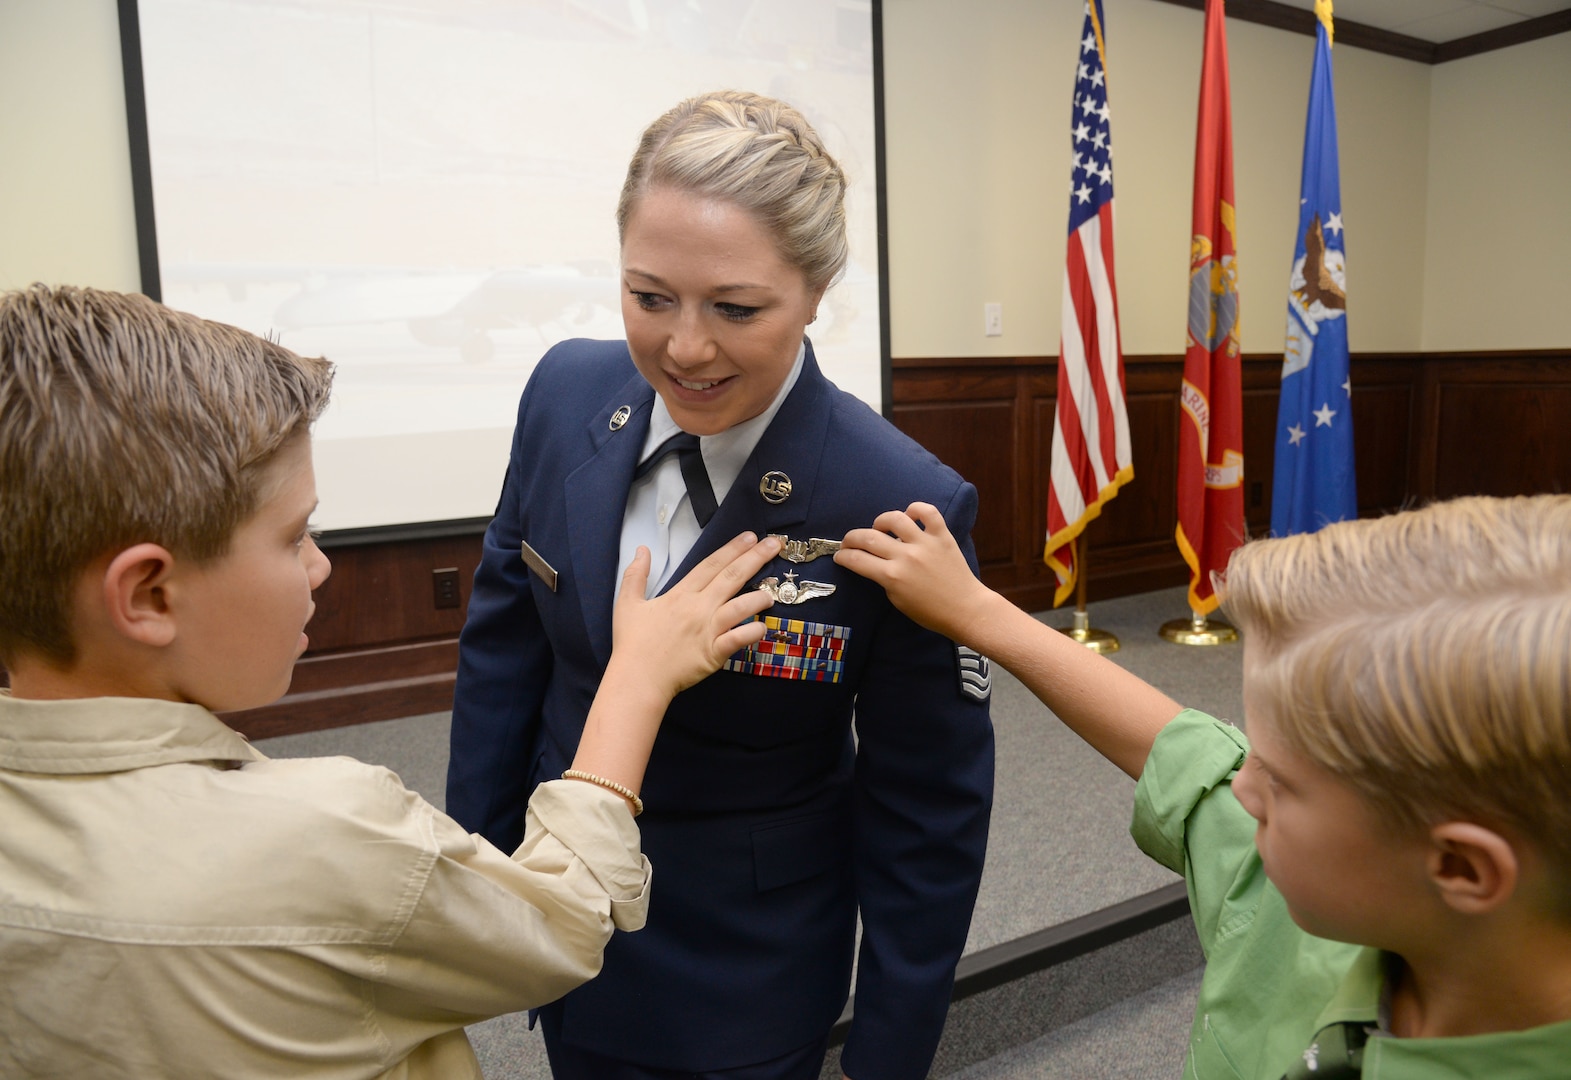 : U.S. Air Force Tech. Sgt. Courtney, has her
remotely piloted aircraft pilot wings pinned on by her sons David and Riley
during the 558th Flying Training Squadron's Undergraduate Remotely Piloted
Aircraft Training Course graduation August 4, 2017, at Joint Base San
Antonio-Randolph, Texas. Tech. Sgt. Courtney is the first-ever enlisted
female to qualify as an RPA pilot. Name badges were blurred due to Air Force
limits on disclosure of identifying information for RPA operators. (U.S. Air
Force Illustration by Tech. Sgt. Ave I. Young)